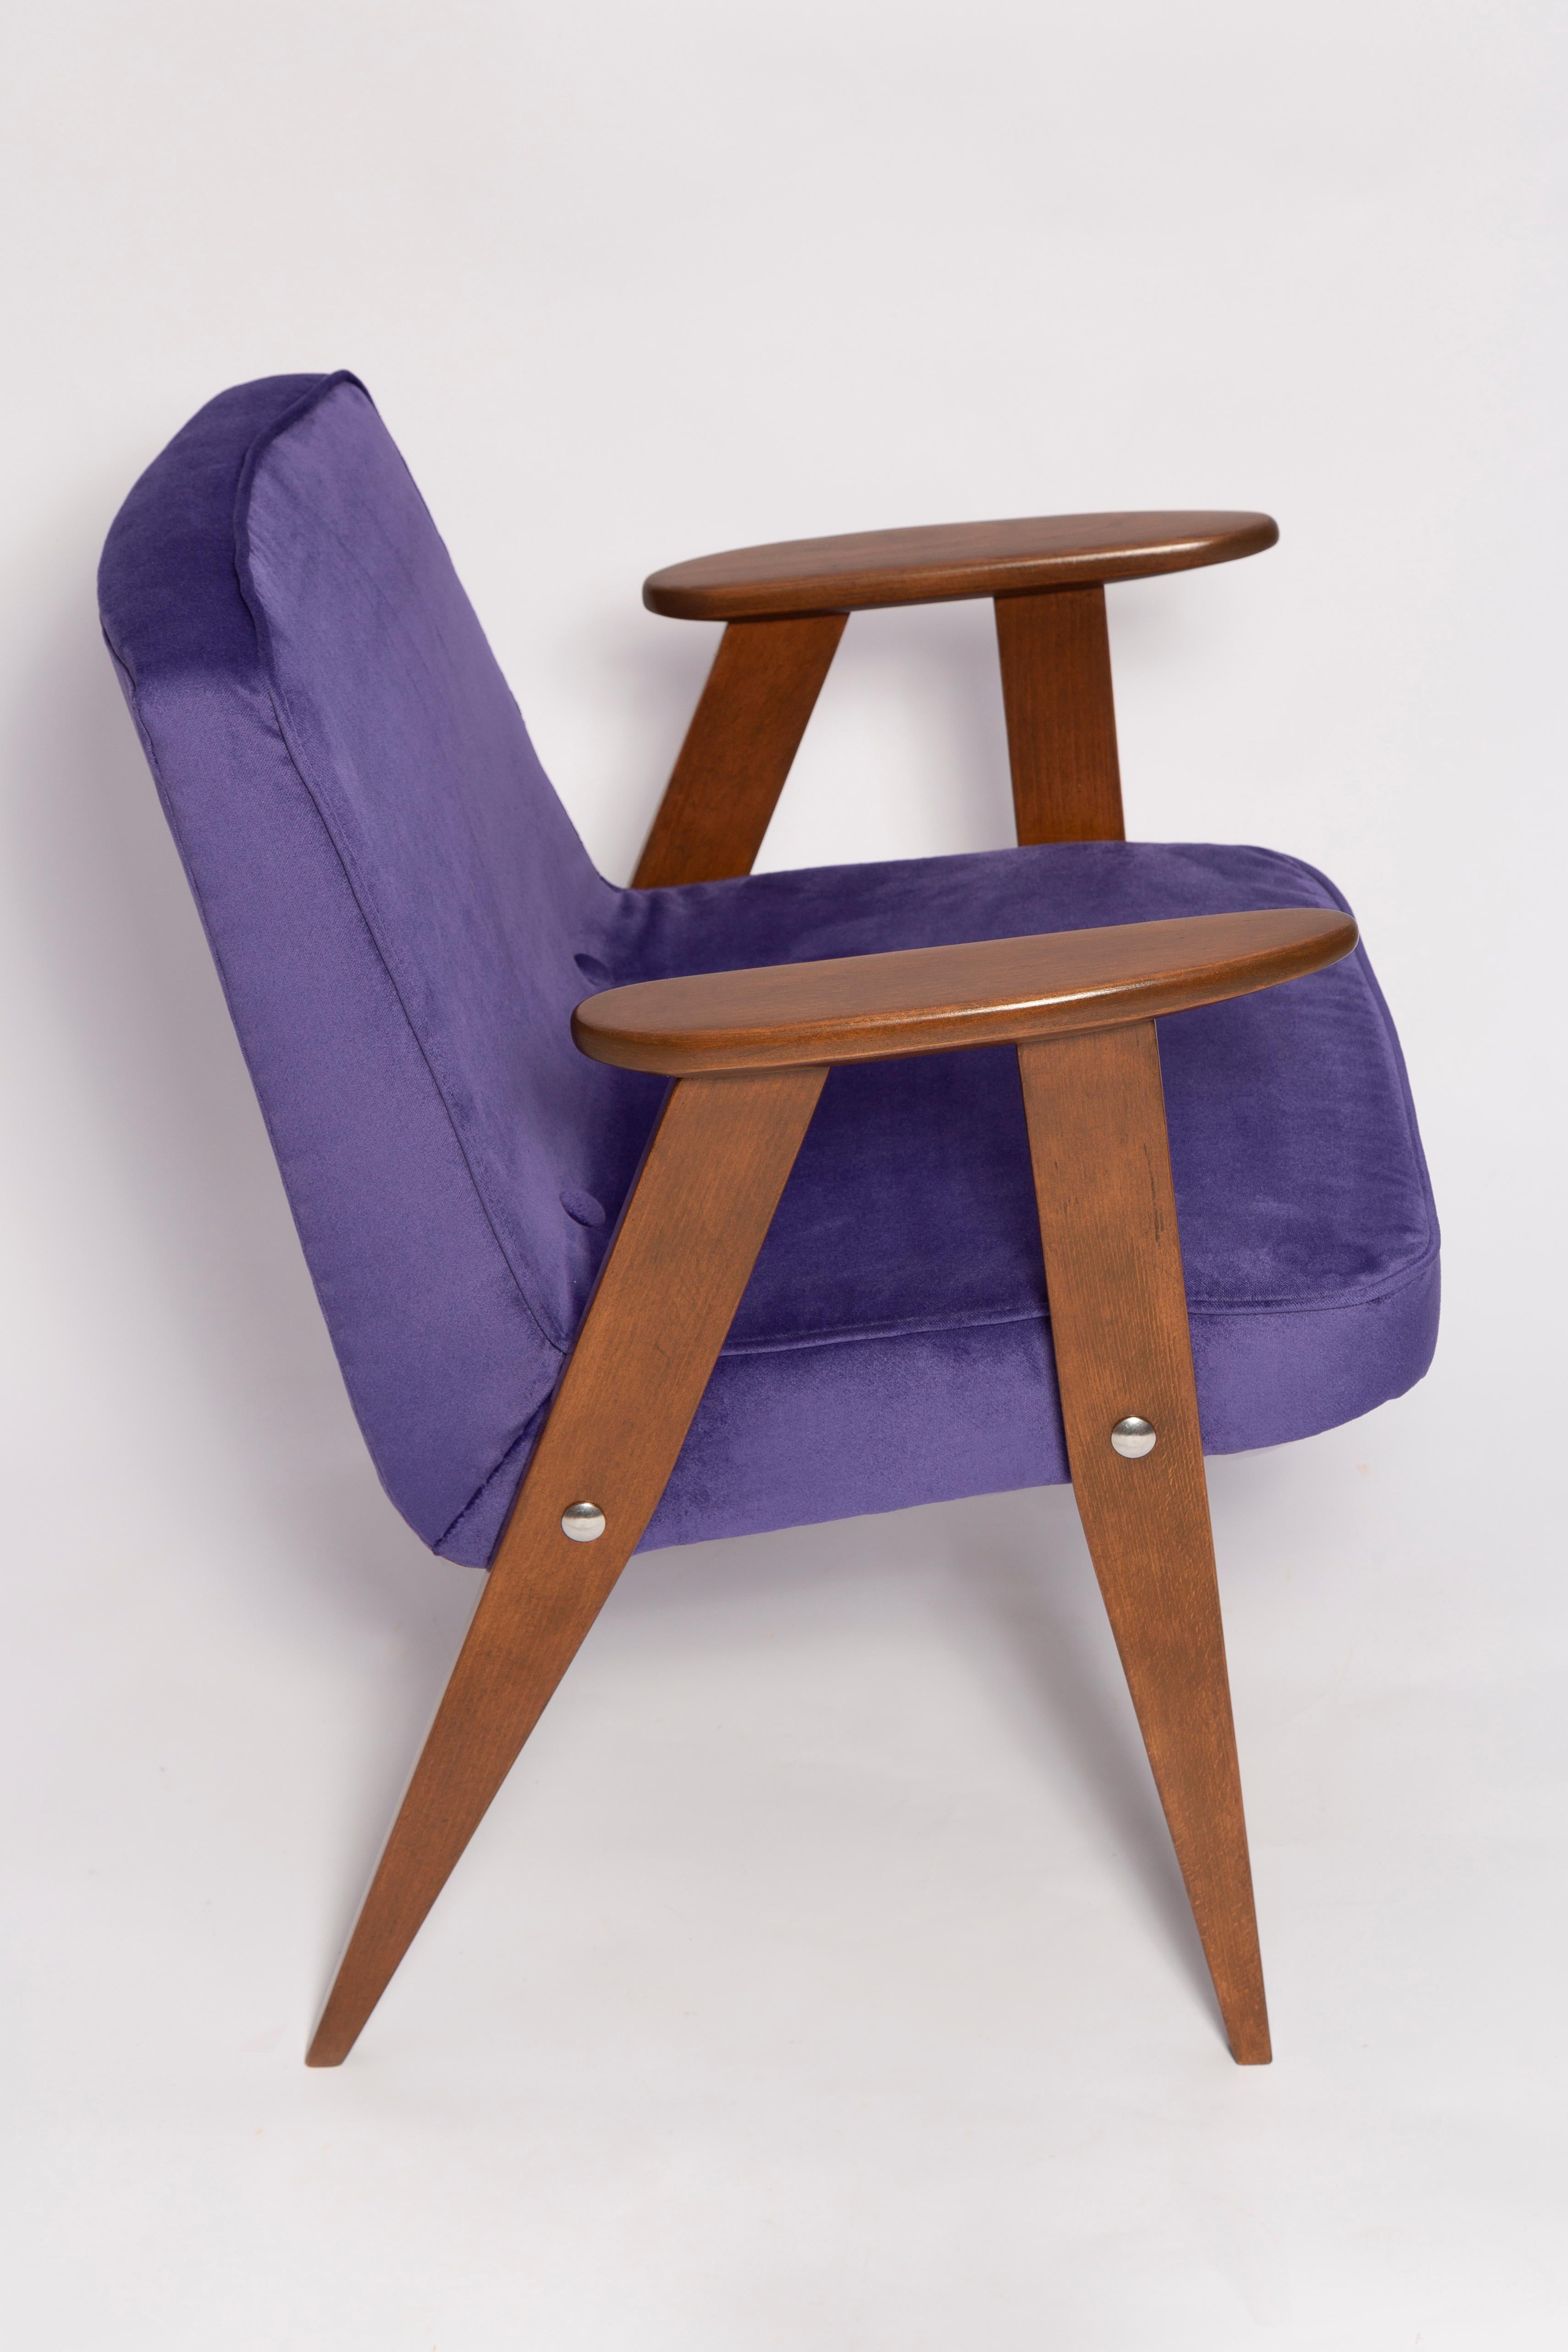 20th Century Mid-Century 366 Armchair in Purple Velvet, by Jozef Chierowski, Europe 1960s For Sale